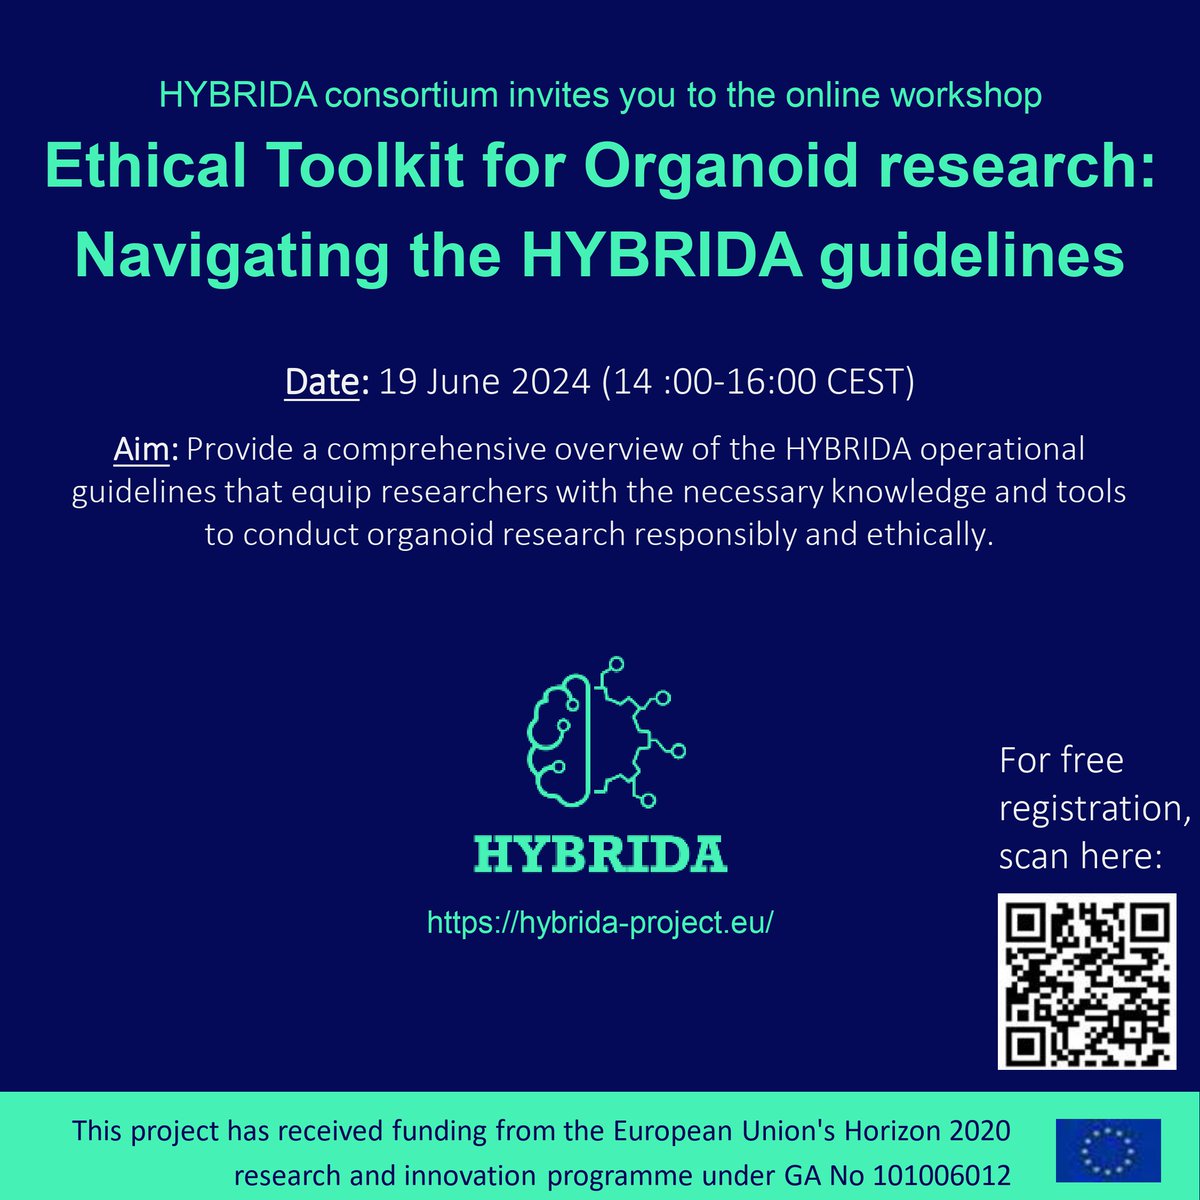 After the successful hybrid event in Brussels, HYBRIDA organises a fully on-line event on the 19th of June 2024 for researchers with a comprehensive overview of the project's operational guidelines. Register here: nettskjema.no/a/429379#/page…